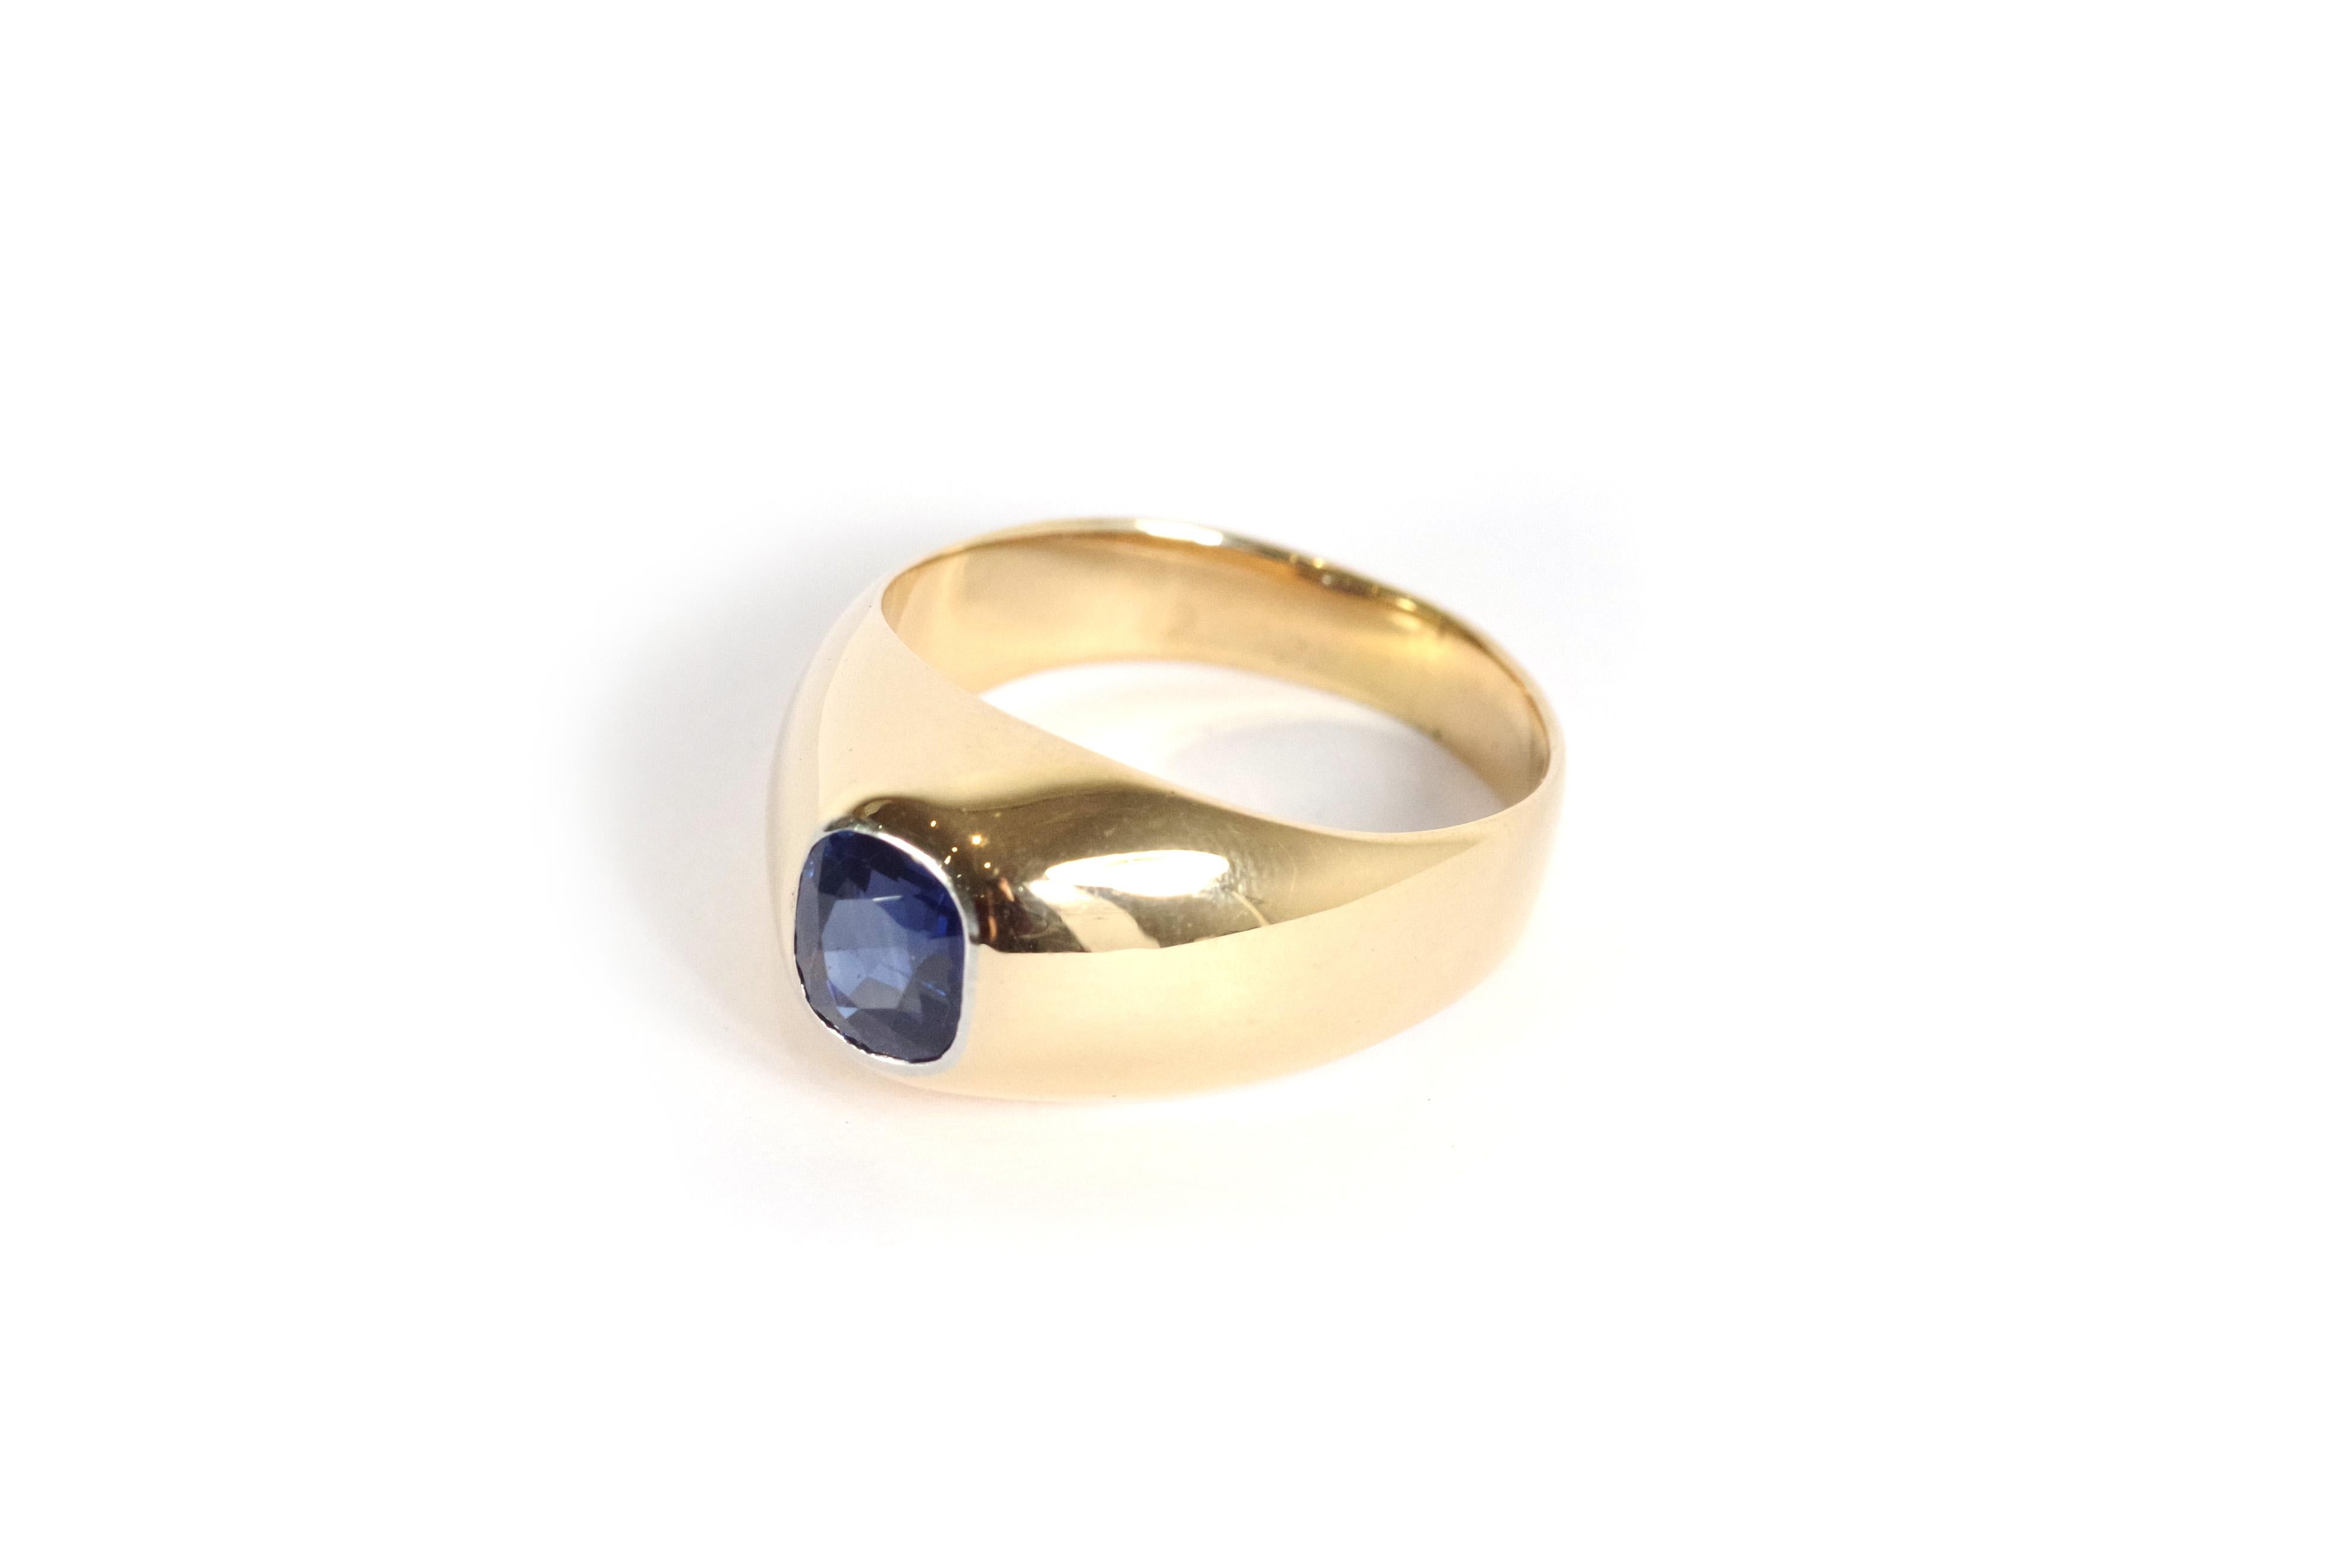 Sapphire band ring in 18 karat yellow gold. With a beautiful royal blue cushion-cut sapphire weighing approx. 1.06 carats. The sapphire has intense blue flashes. Vintage ring, circa 1950, France. 

Owl hallmark (French state hallmark for 18 karat